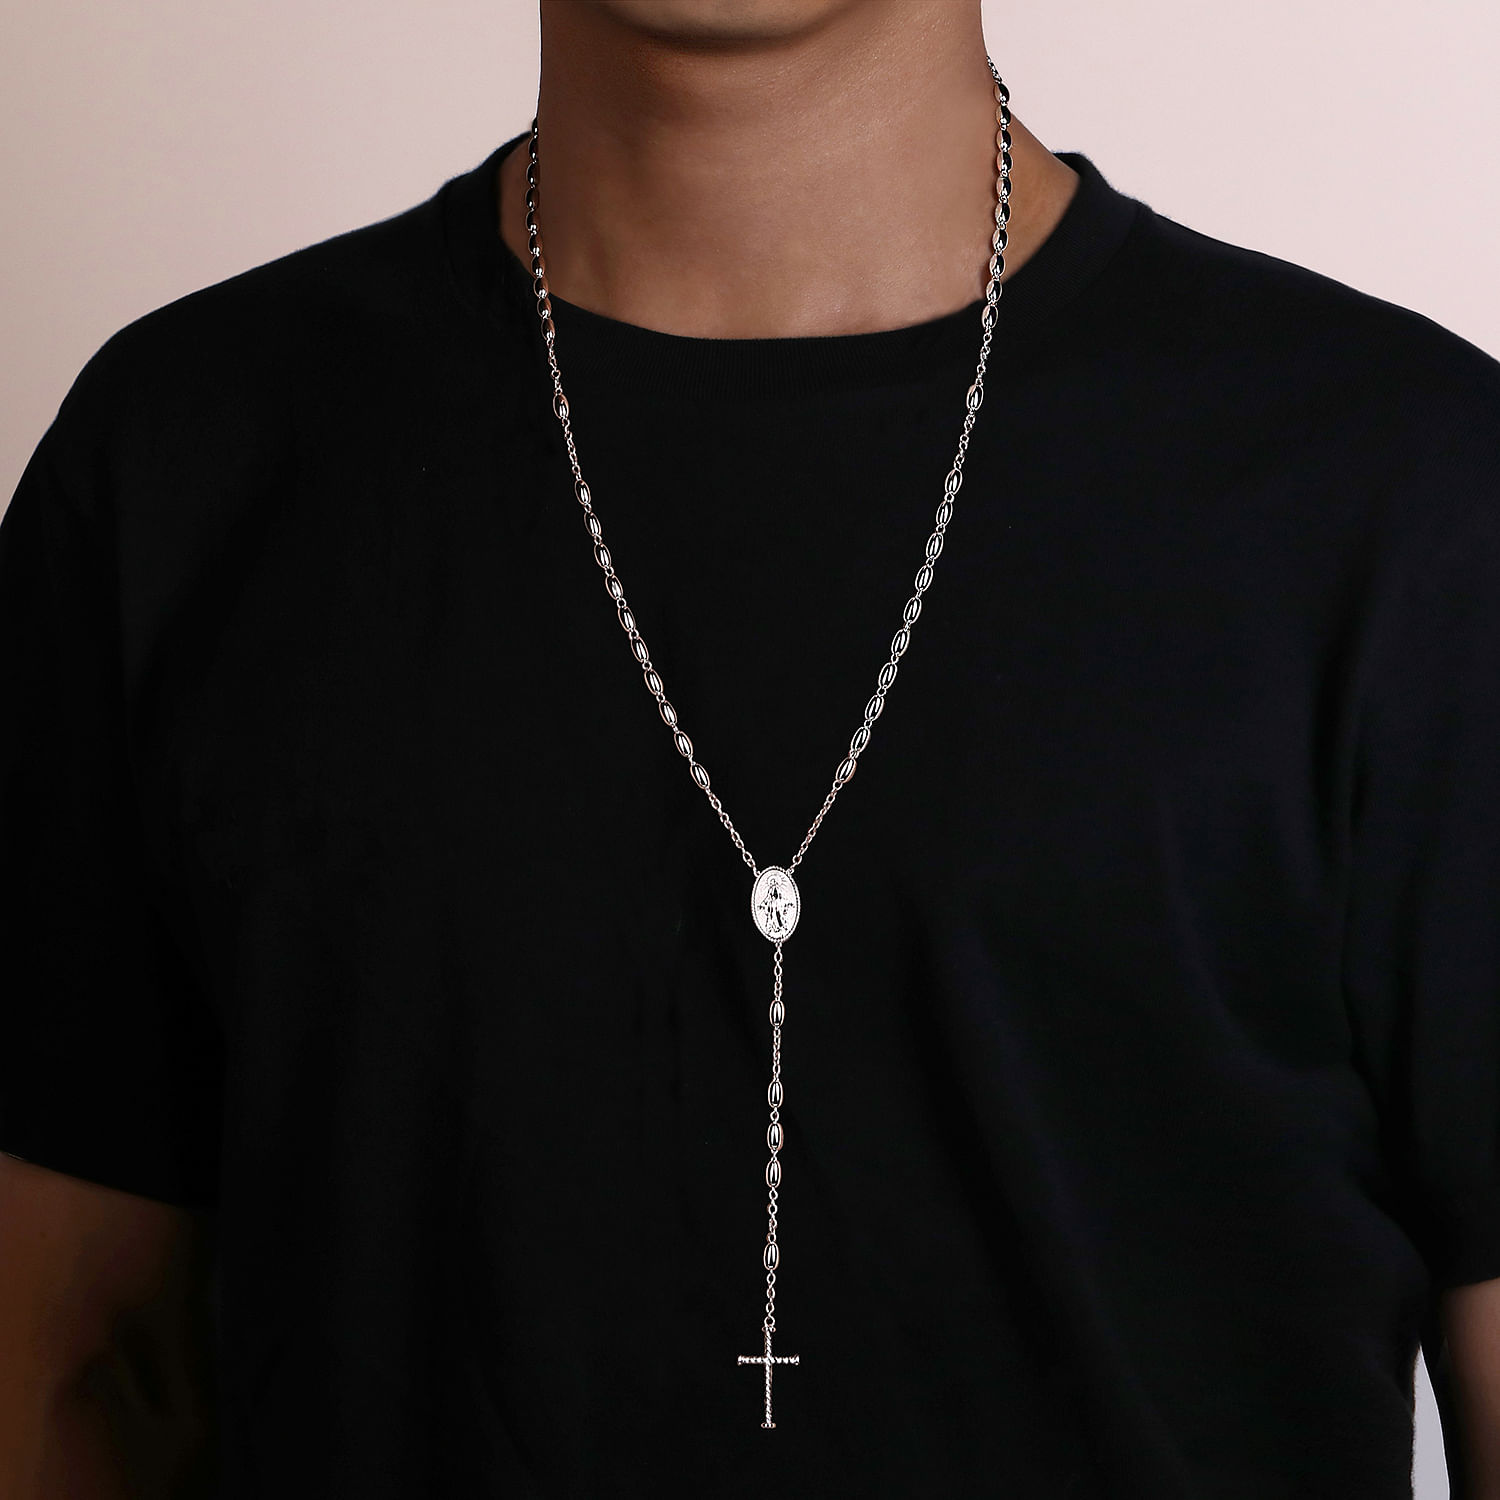 27 Inch 925 Sterling Silver Men's Cross Rosary Necklace